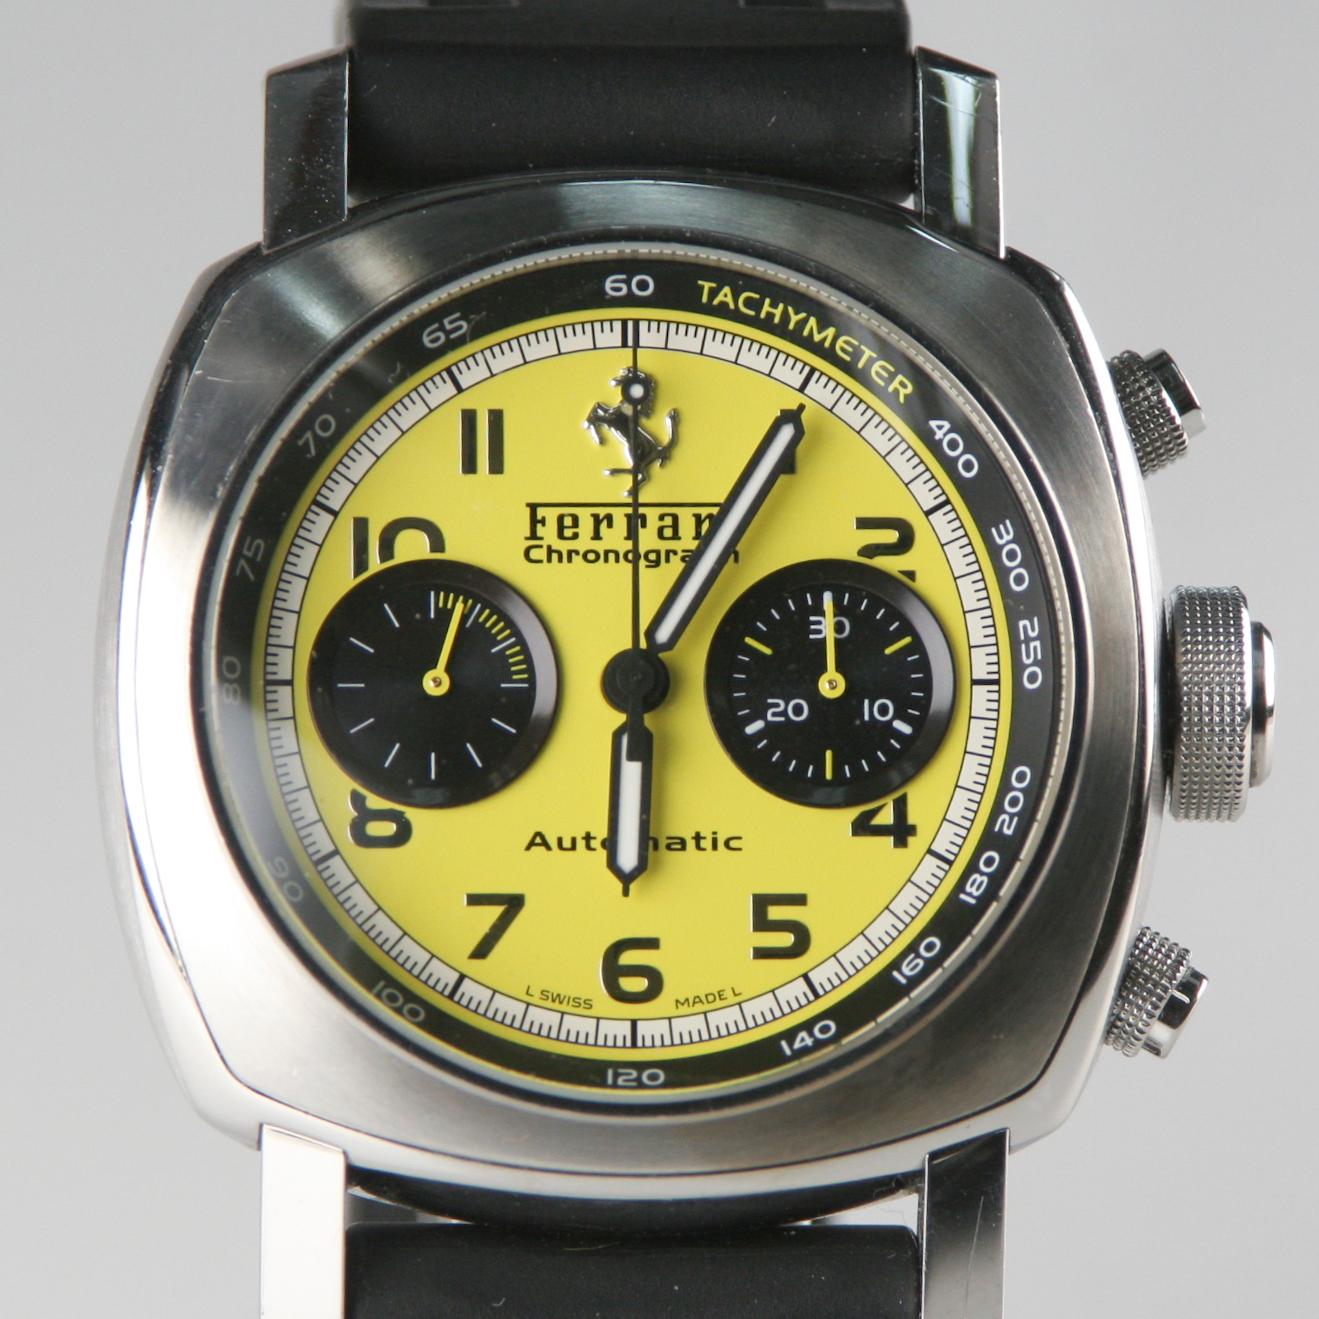 Model #FER00011 
Stainless Steel Case
43 mm in Diameter (47 mm w/ Crown)
Lug-to-Lug Distance = 55 mm
Thickness = 14 mm
Yellow Chronograph Dial w/ Beveled Tachymeter
Features Trademark Ferrari Logo at 12:00
Labeled 